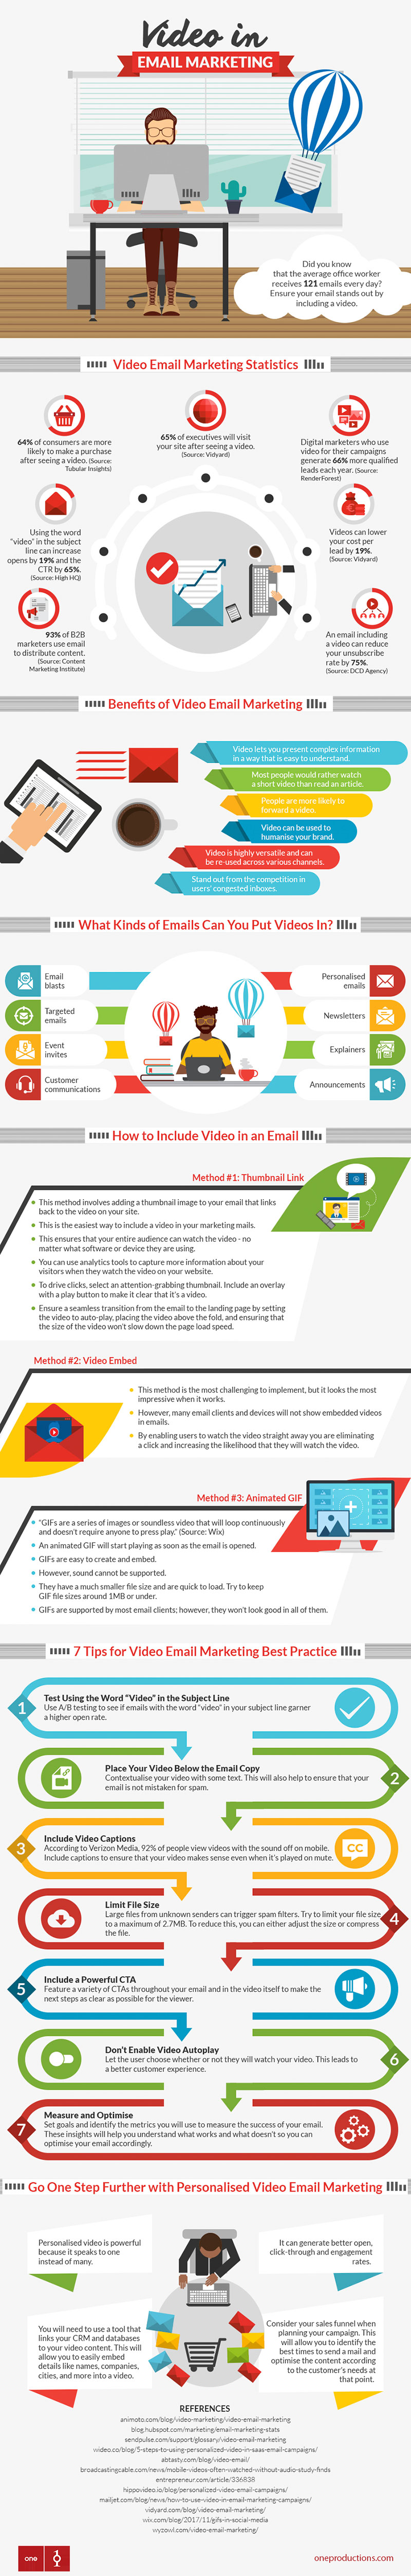 Video in Email Marketing Strategy